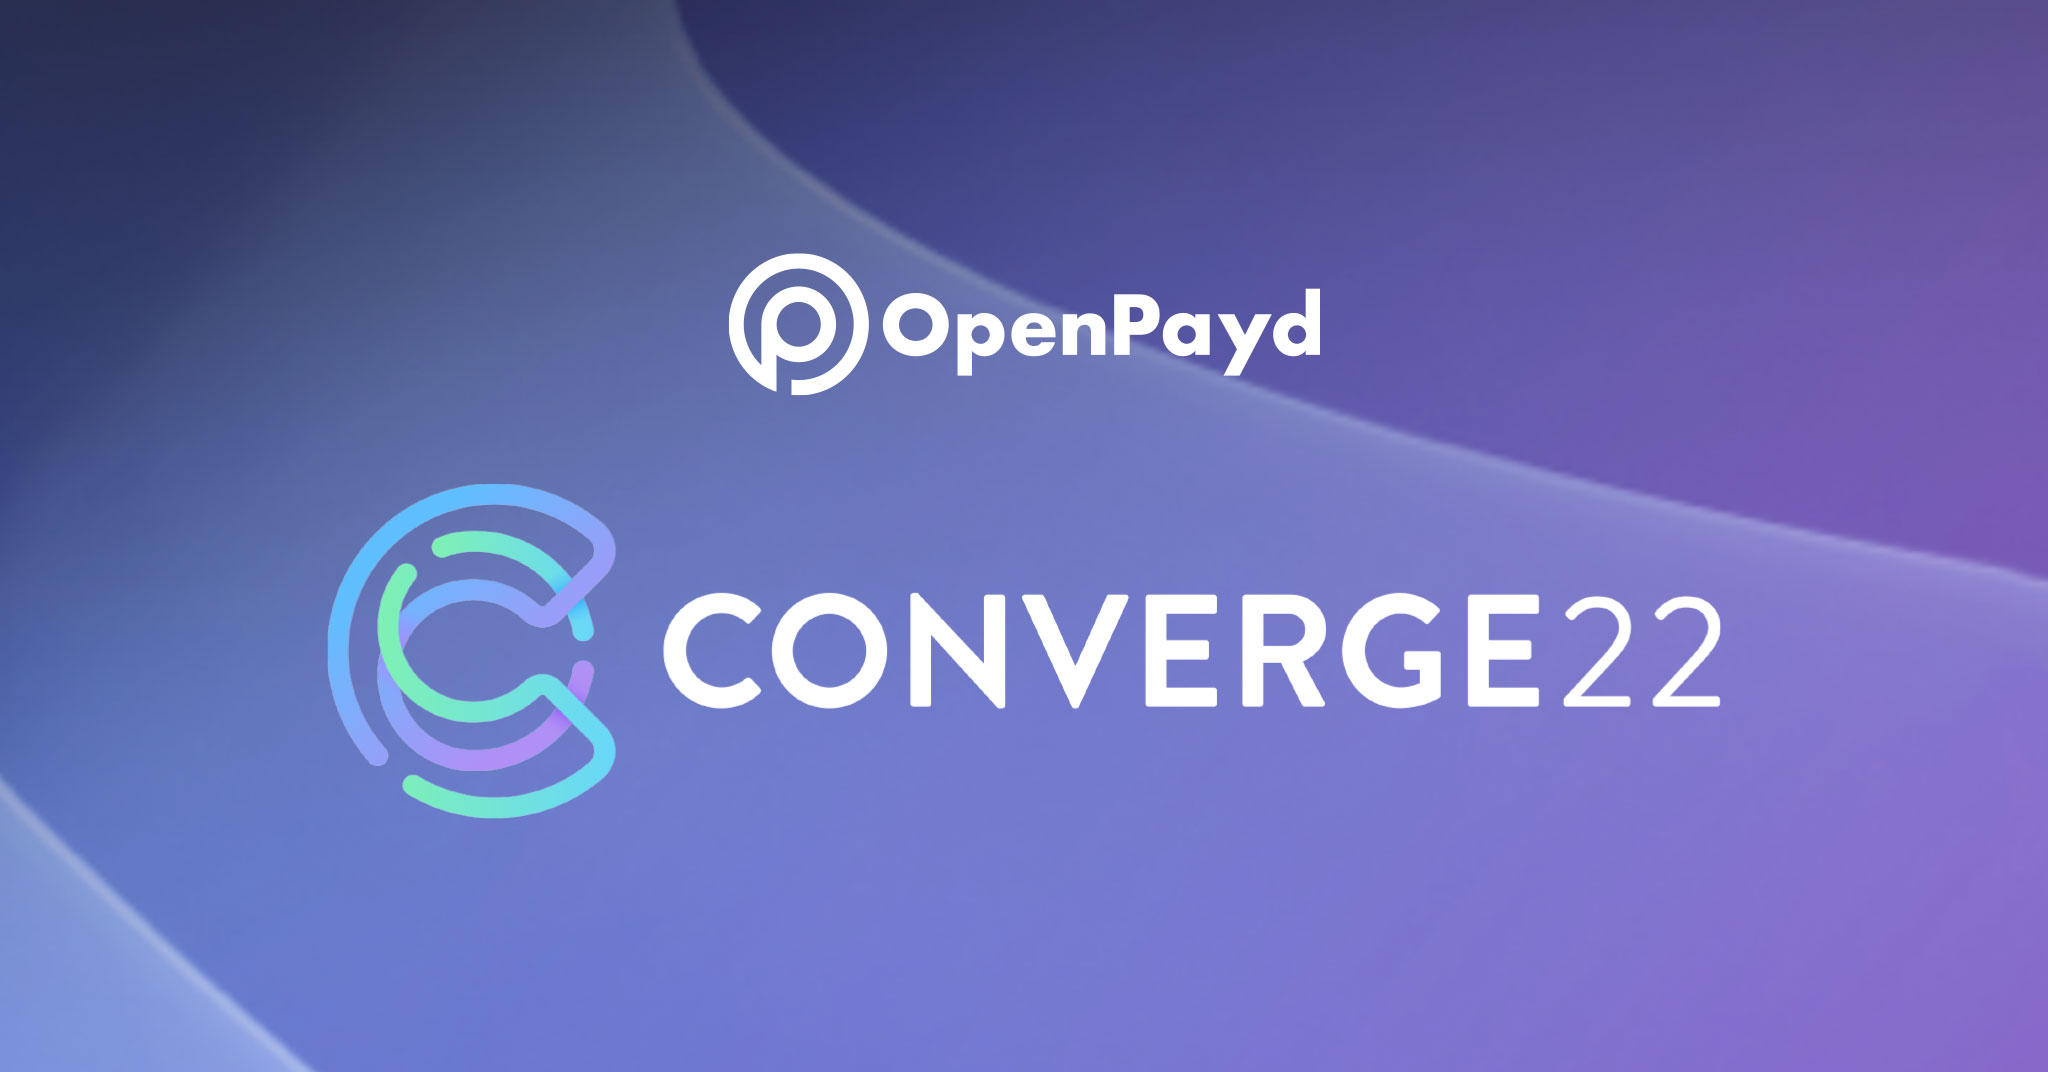 OpenPayd at Converge22 